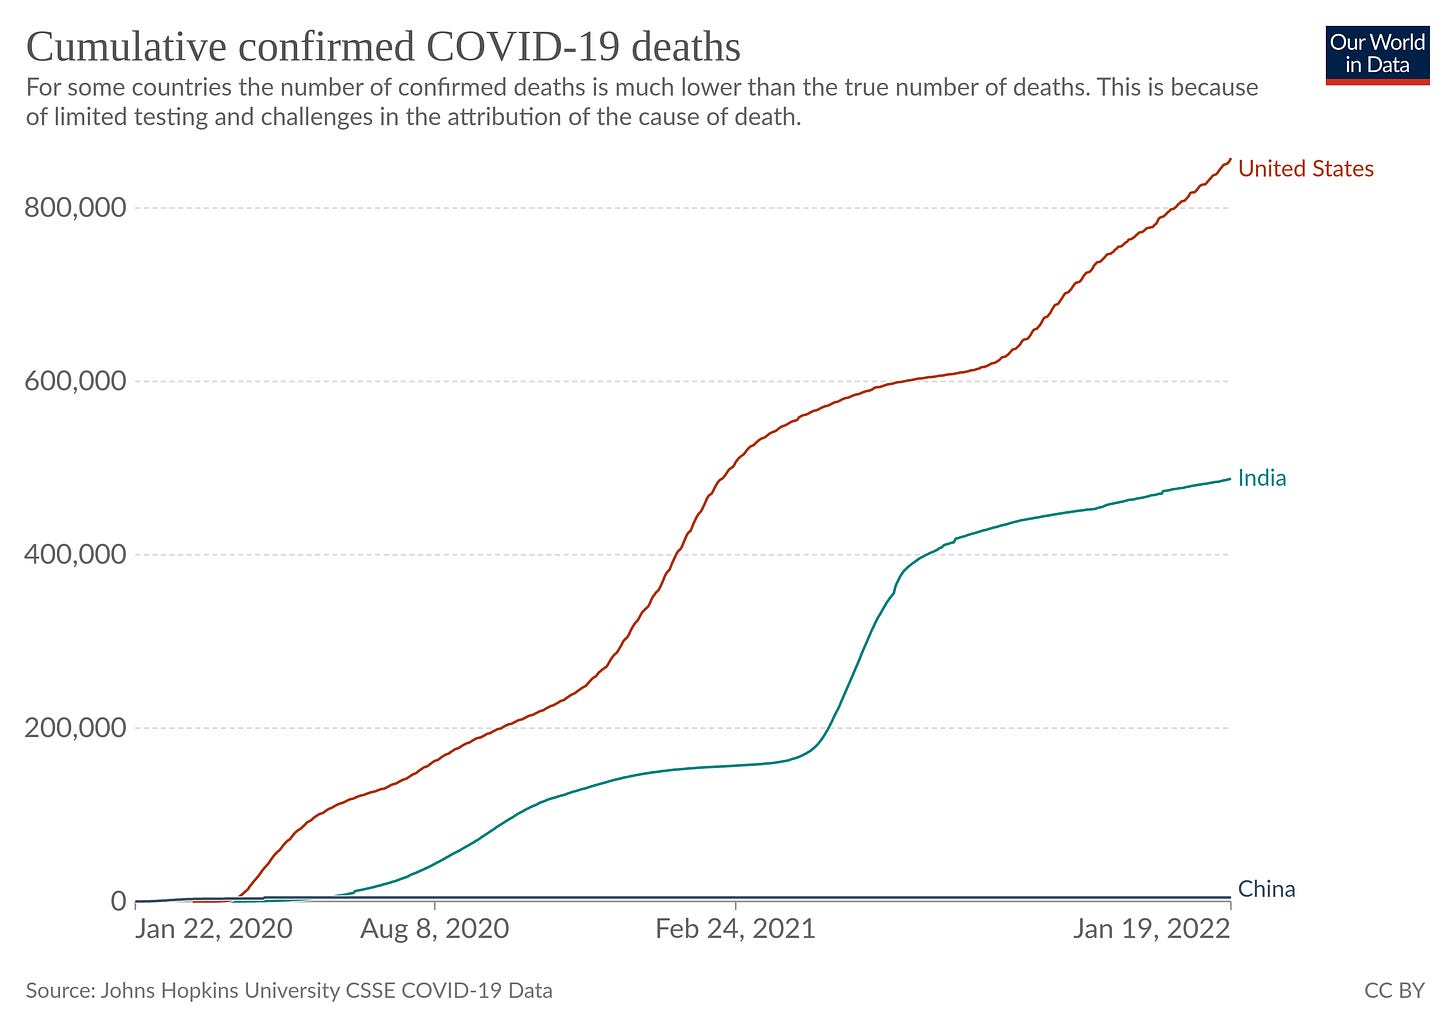 Line charts of cumulative confirmed COVID-19 deaths during the pandemic in the US, India (fewer than the US), and China (visually hard to distinguish from zero).